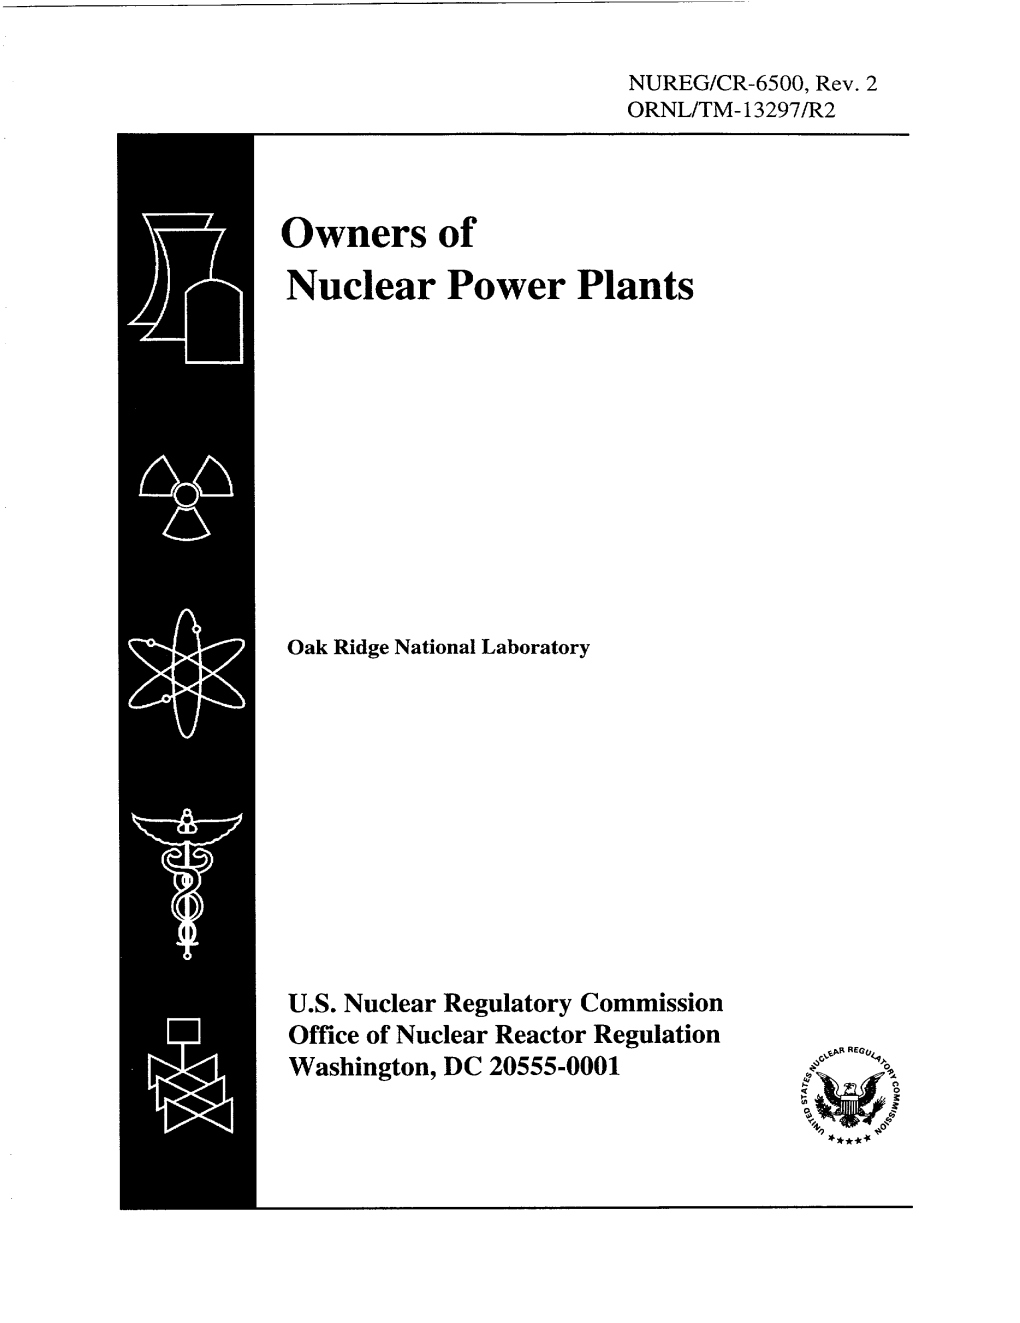 NUREG/CR-6500, Rev 2, "Owners of Nuclear Power Plants."